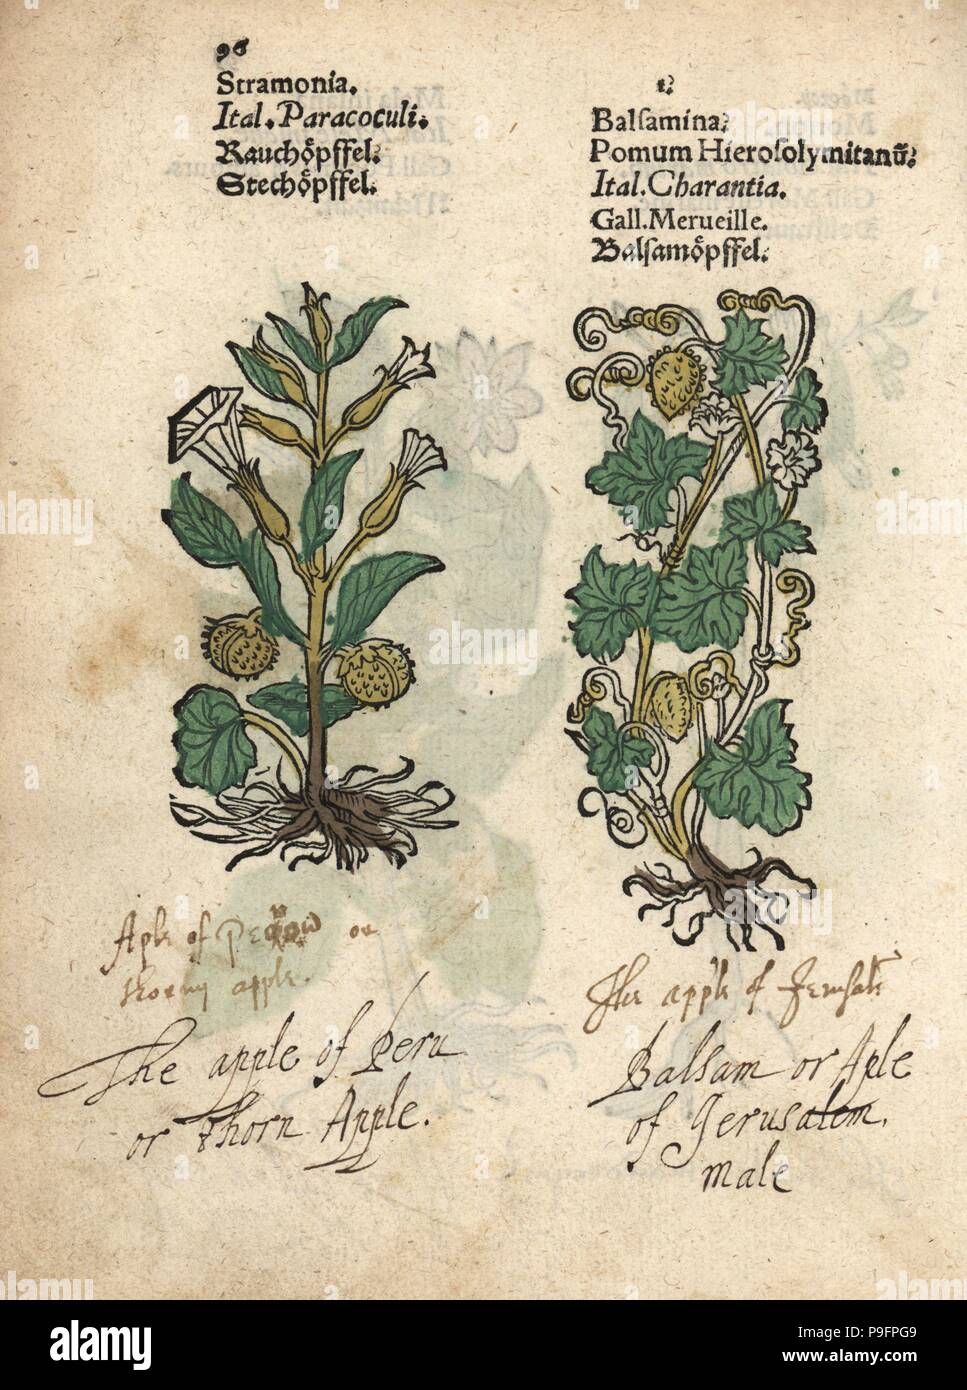 Thorn apple, Datura metel, and balsam apple, Momordica balsamina. Handcoloured woodblock engraving of a botanical illustration from Adam Lonicer's Krauterbuch, or Herbal, Frankfurt, 1557. This from a 17th century pirate edition or atlas of illustrations only, with captions in Latin, Greek, French, Italian, German, and in English manuscript. Stock Photo